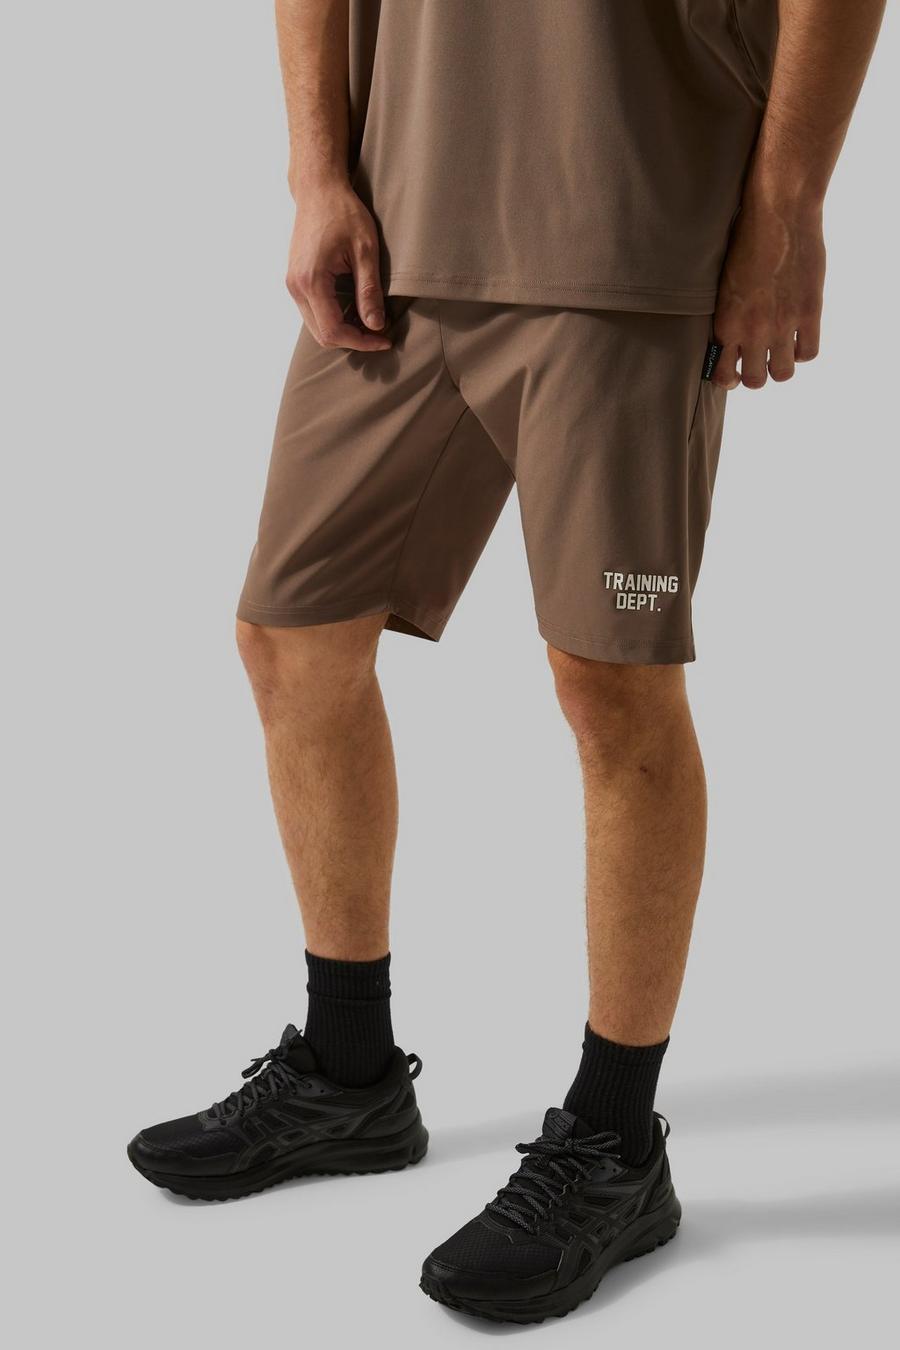 Taupe beige Tall Man Active Training Dept Performance Shorts